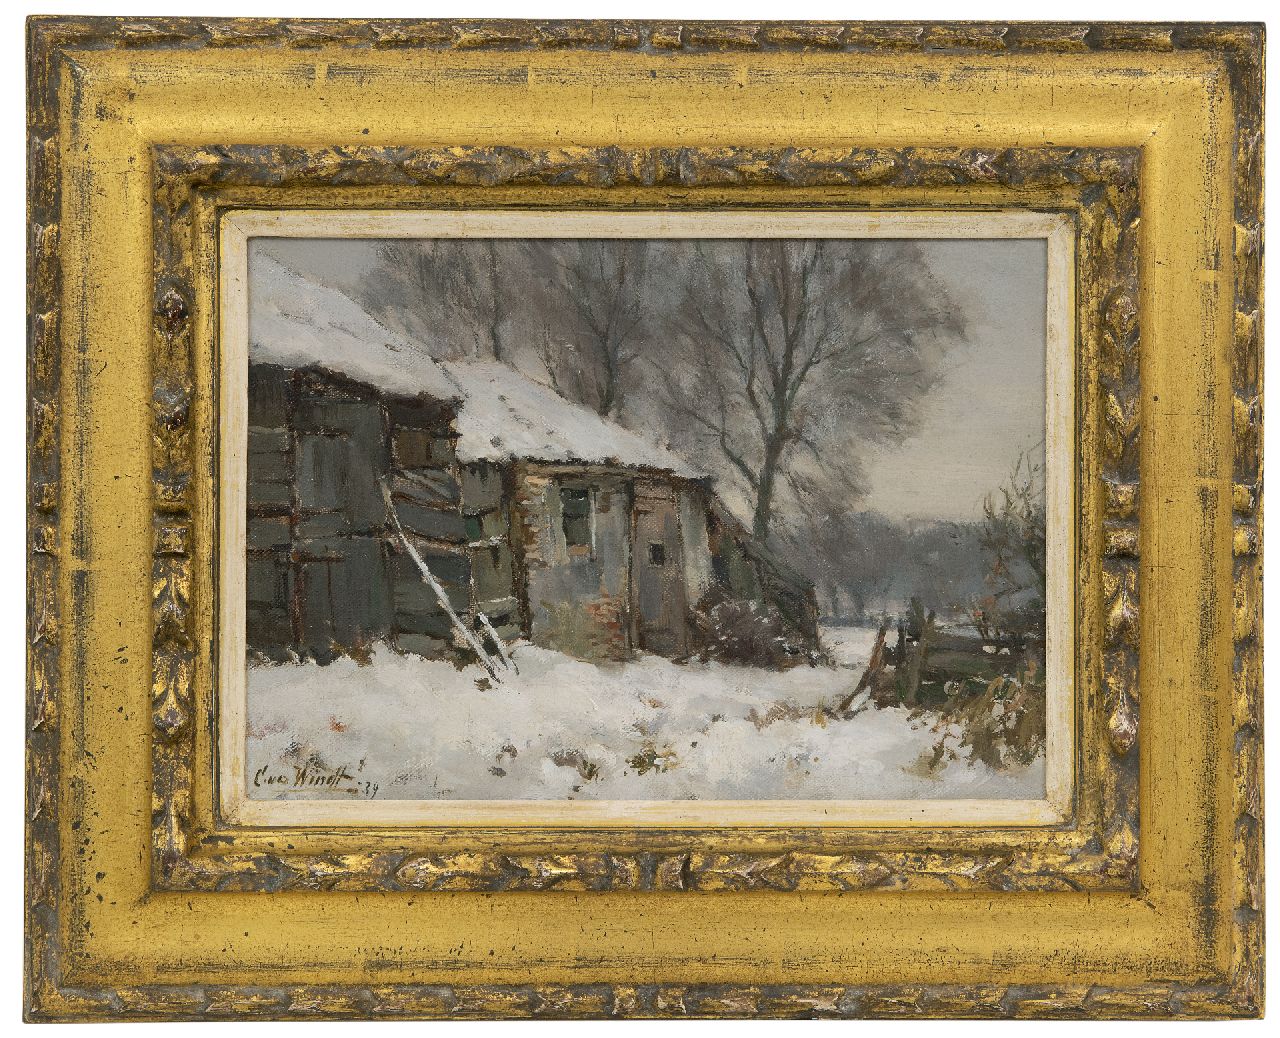 Windt Ch. van der | Christophe 'Chris' van der Windt | Paintings offered for sale | Farmhouse in the snow, oil on canvas laid down on panel 21.5 x 29.8 cm, signed l.l. and dated '39